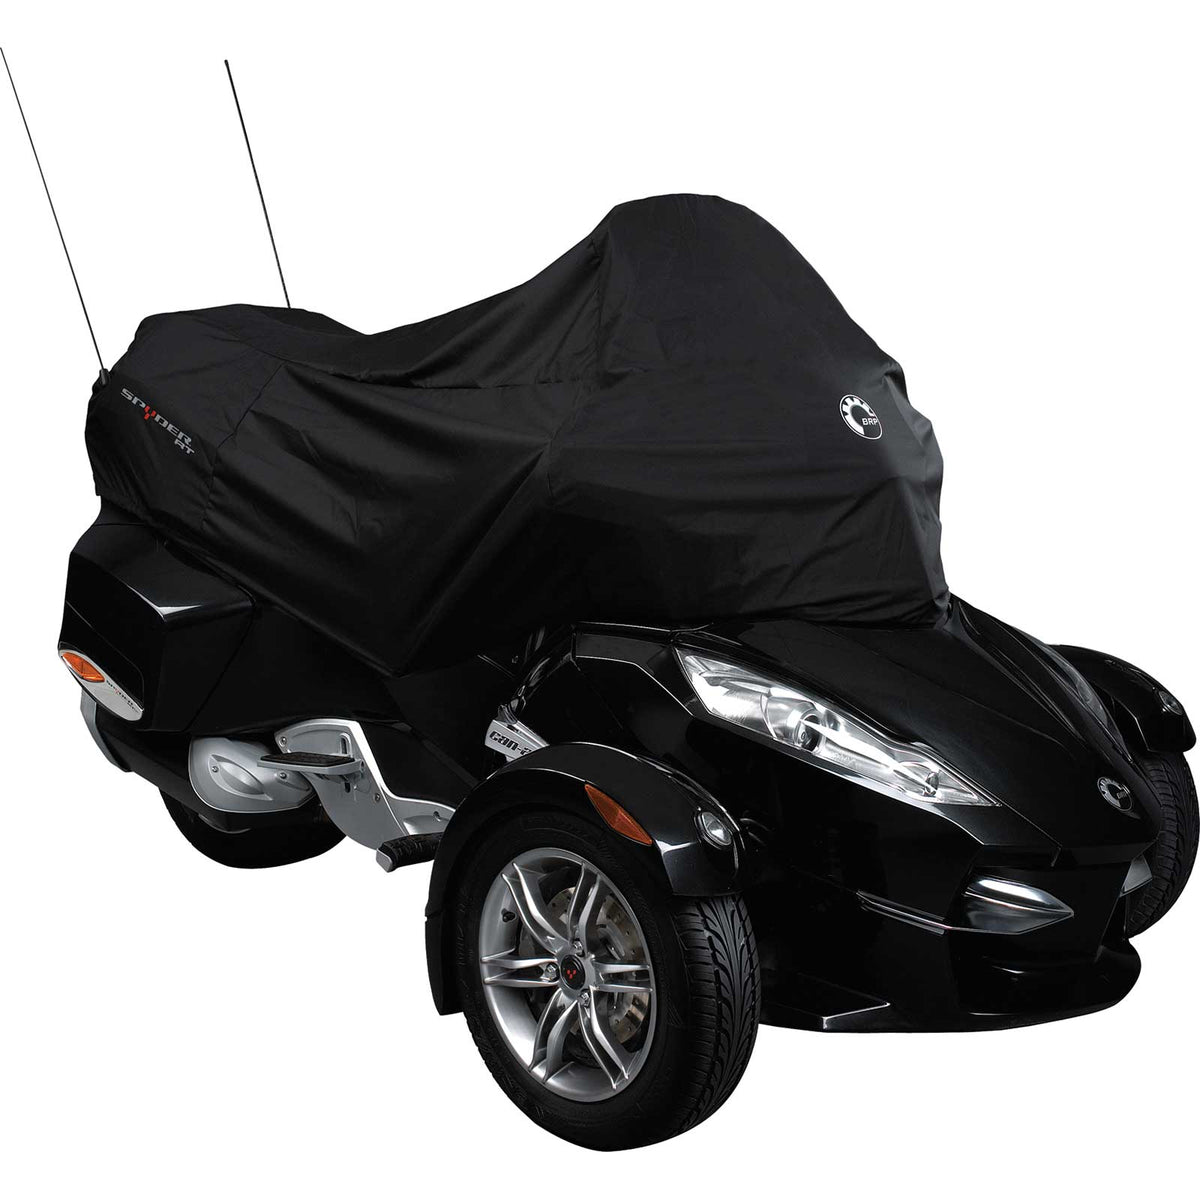 Travel Cover - Spyder RT models 2019 and prior